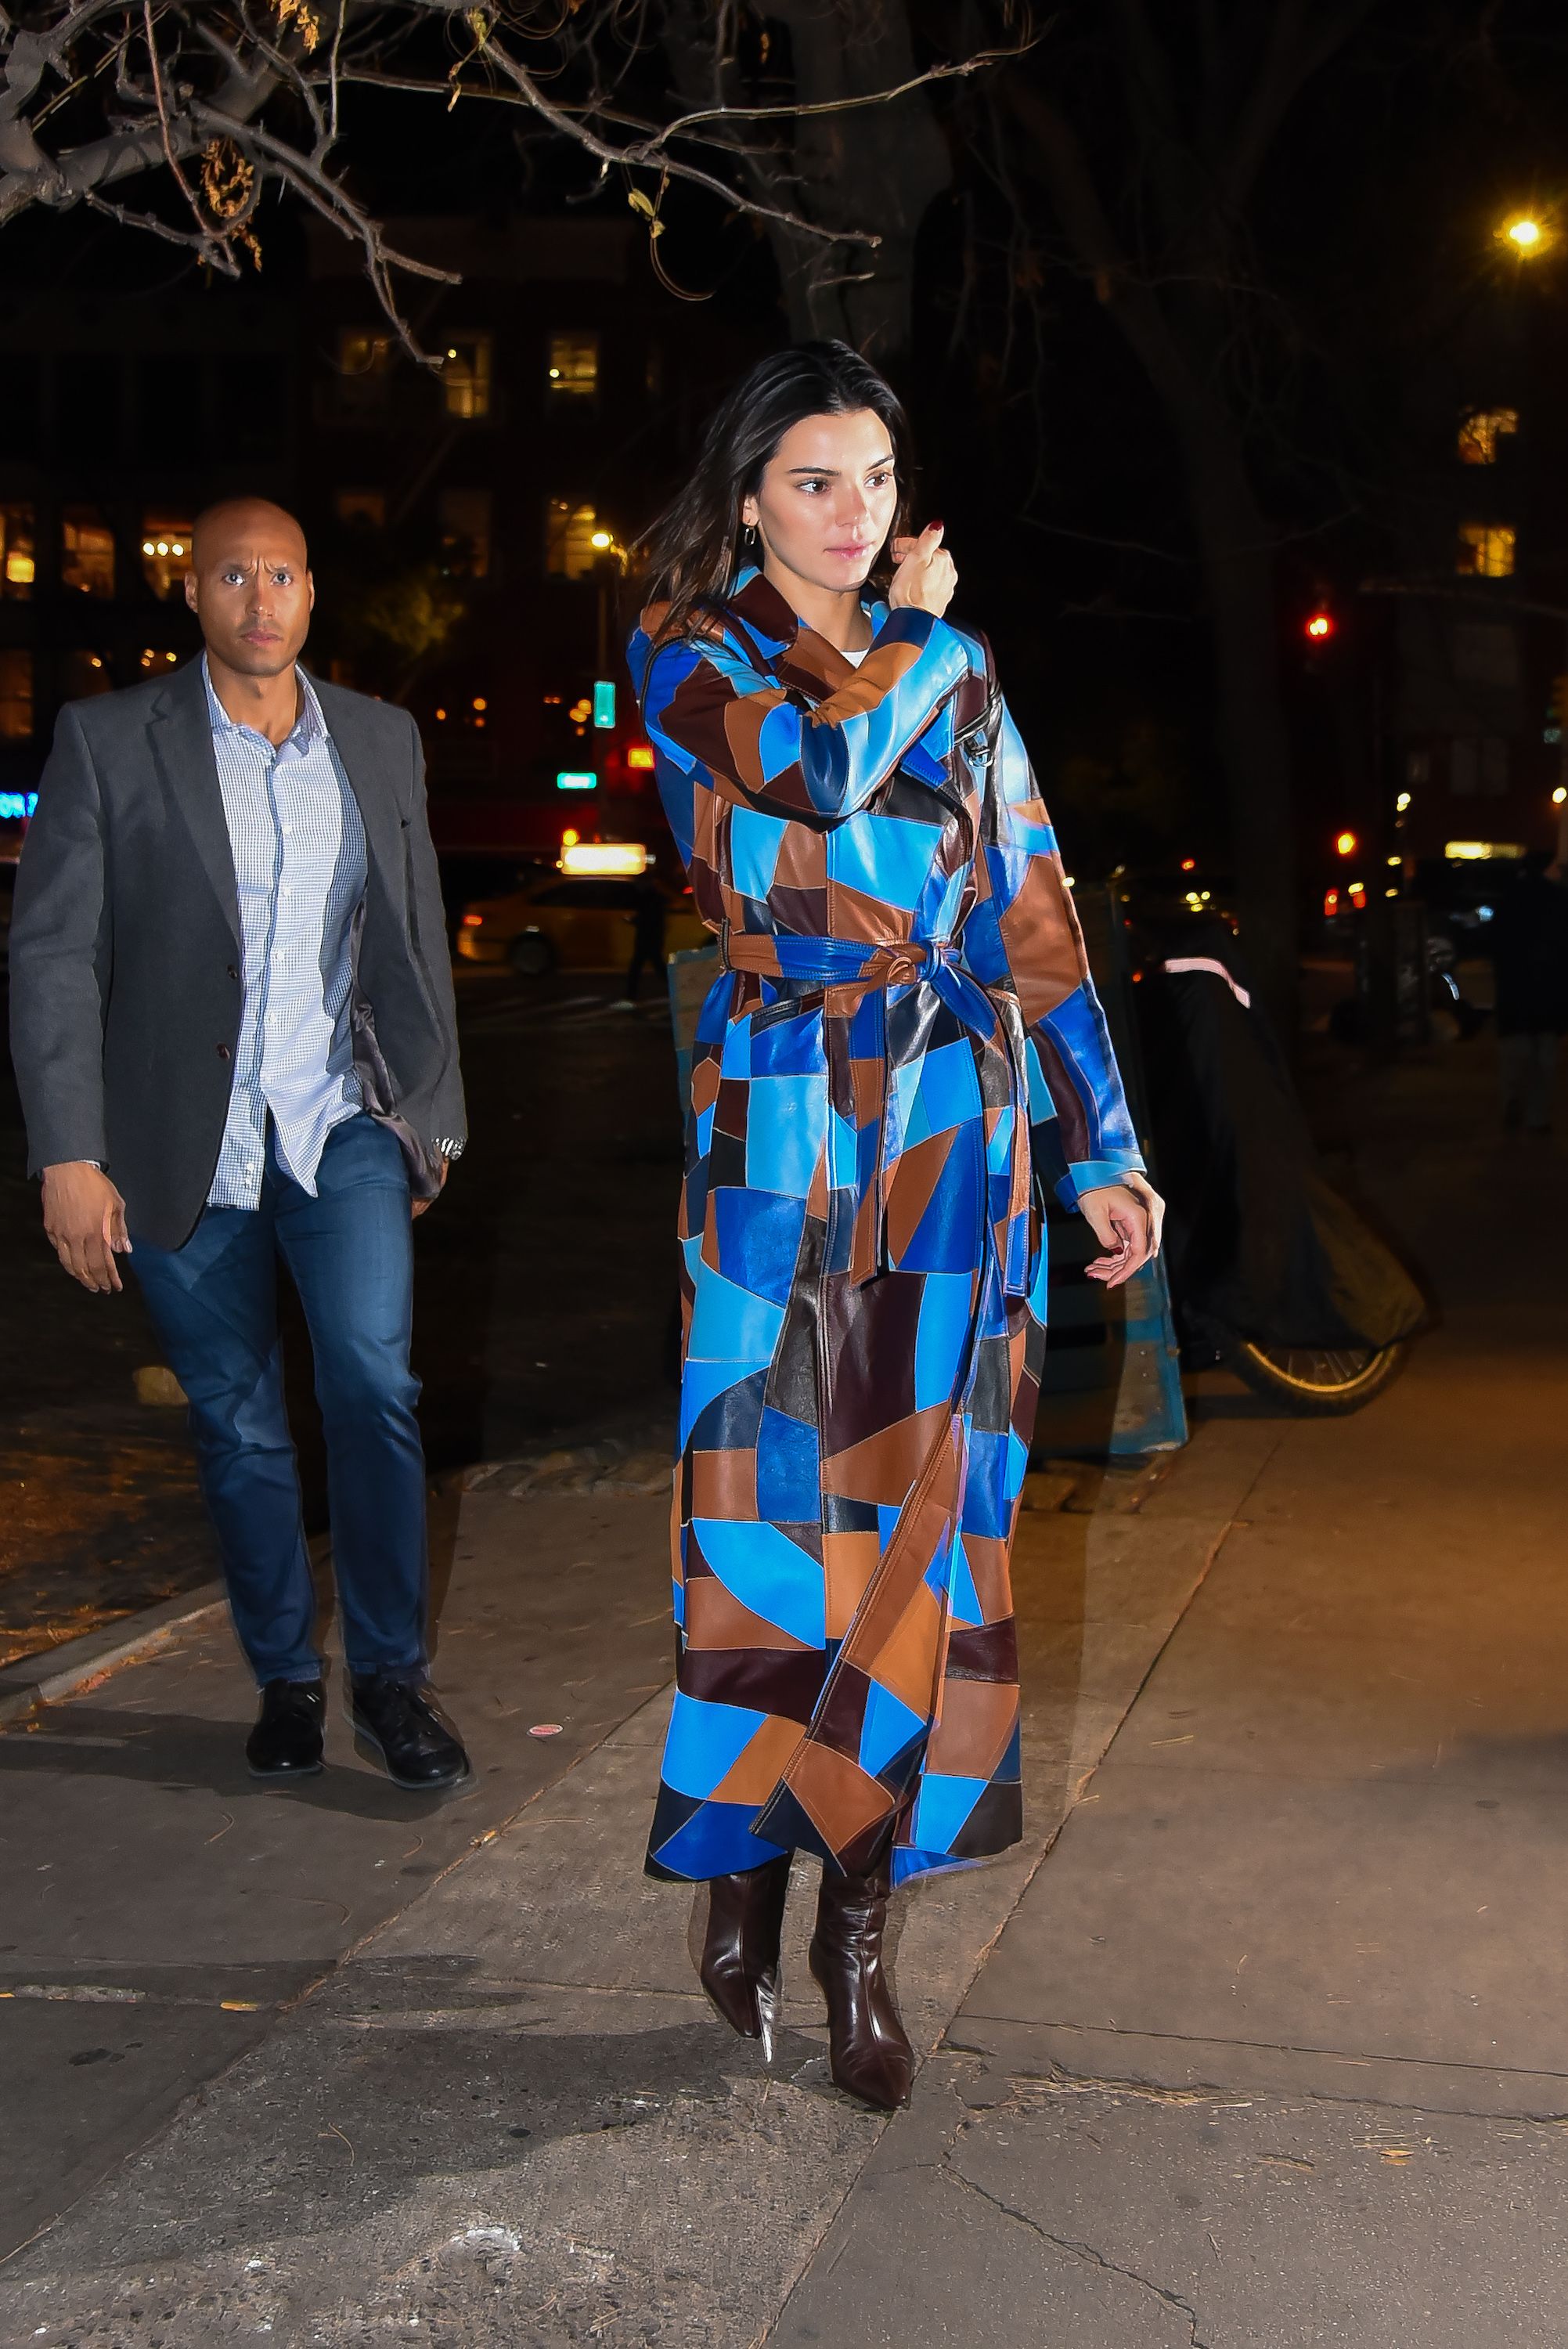 Kendall Jenner rocks offduty model style and no trousers in NYC